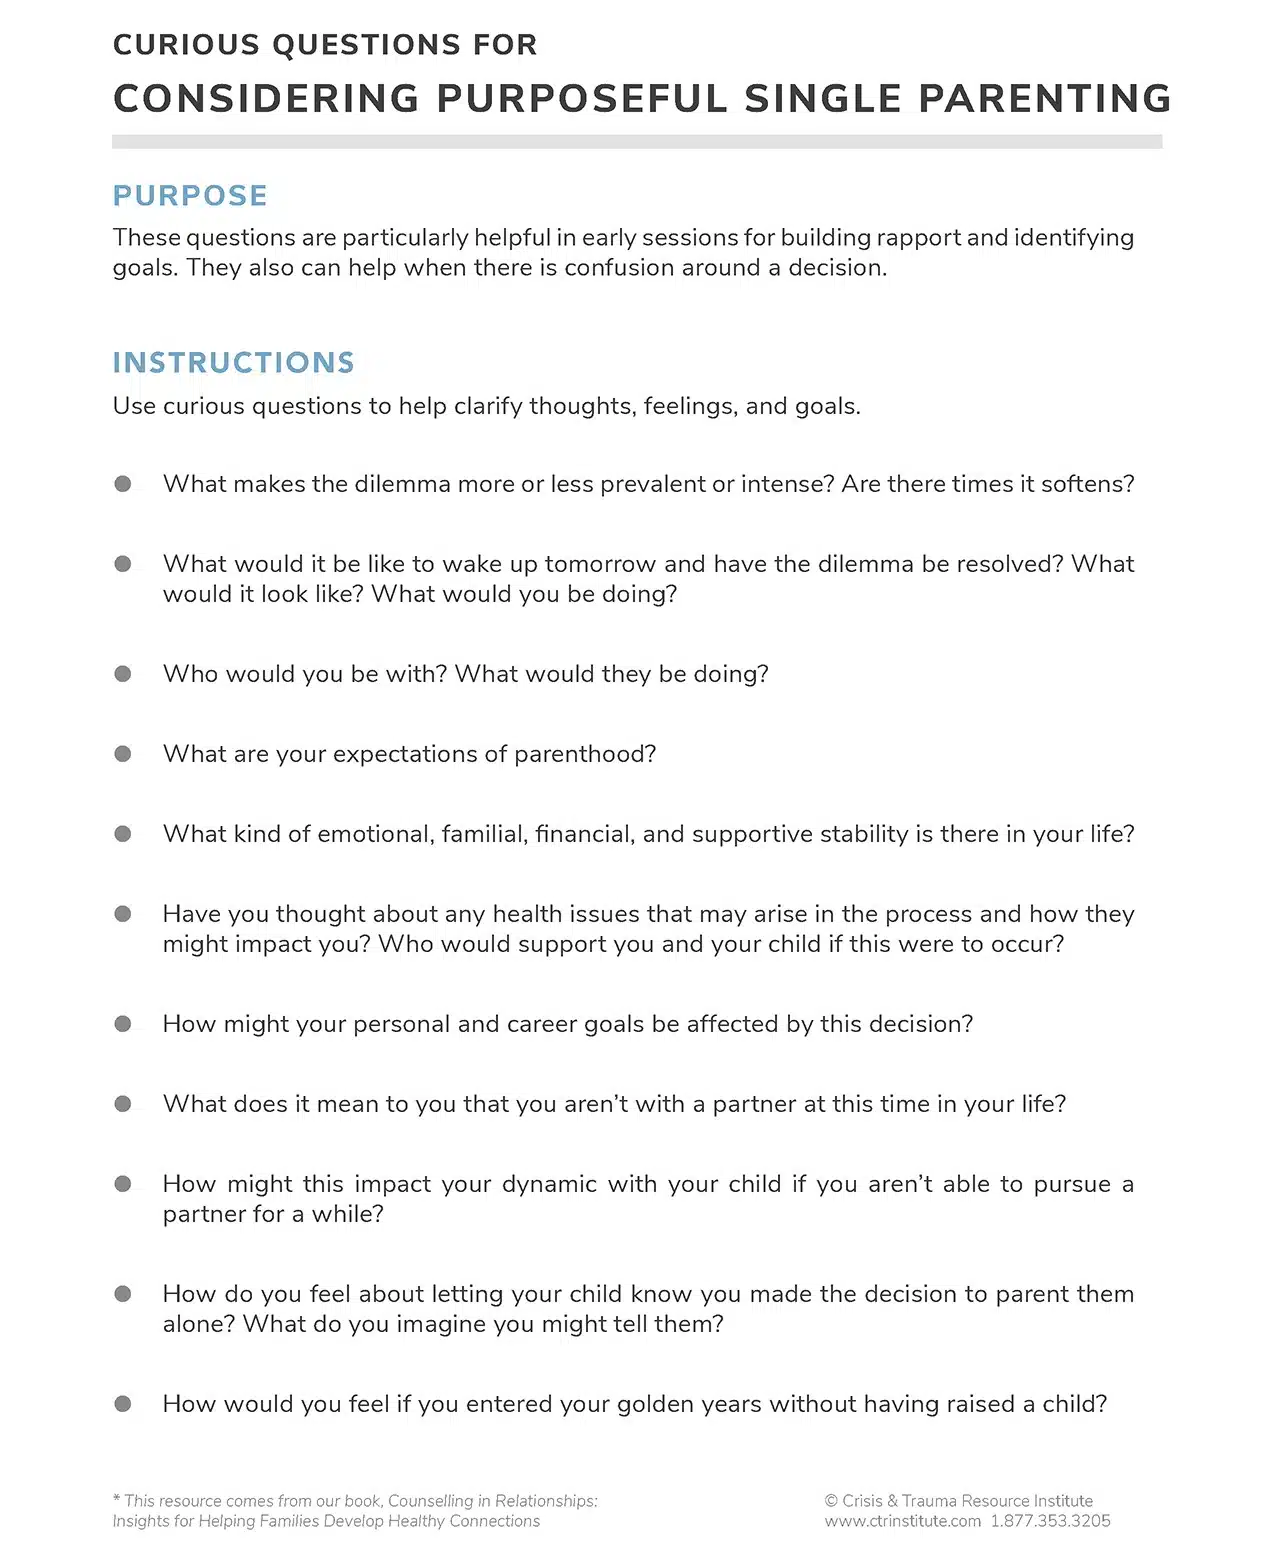 Image of Free Printable Handout for Considering Purposeful Single Parenting